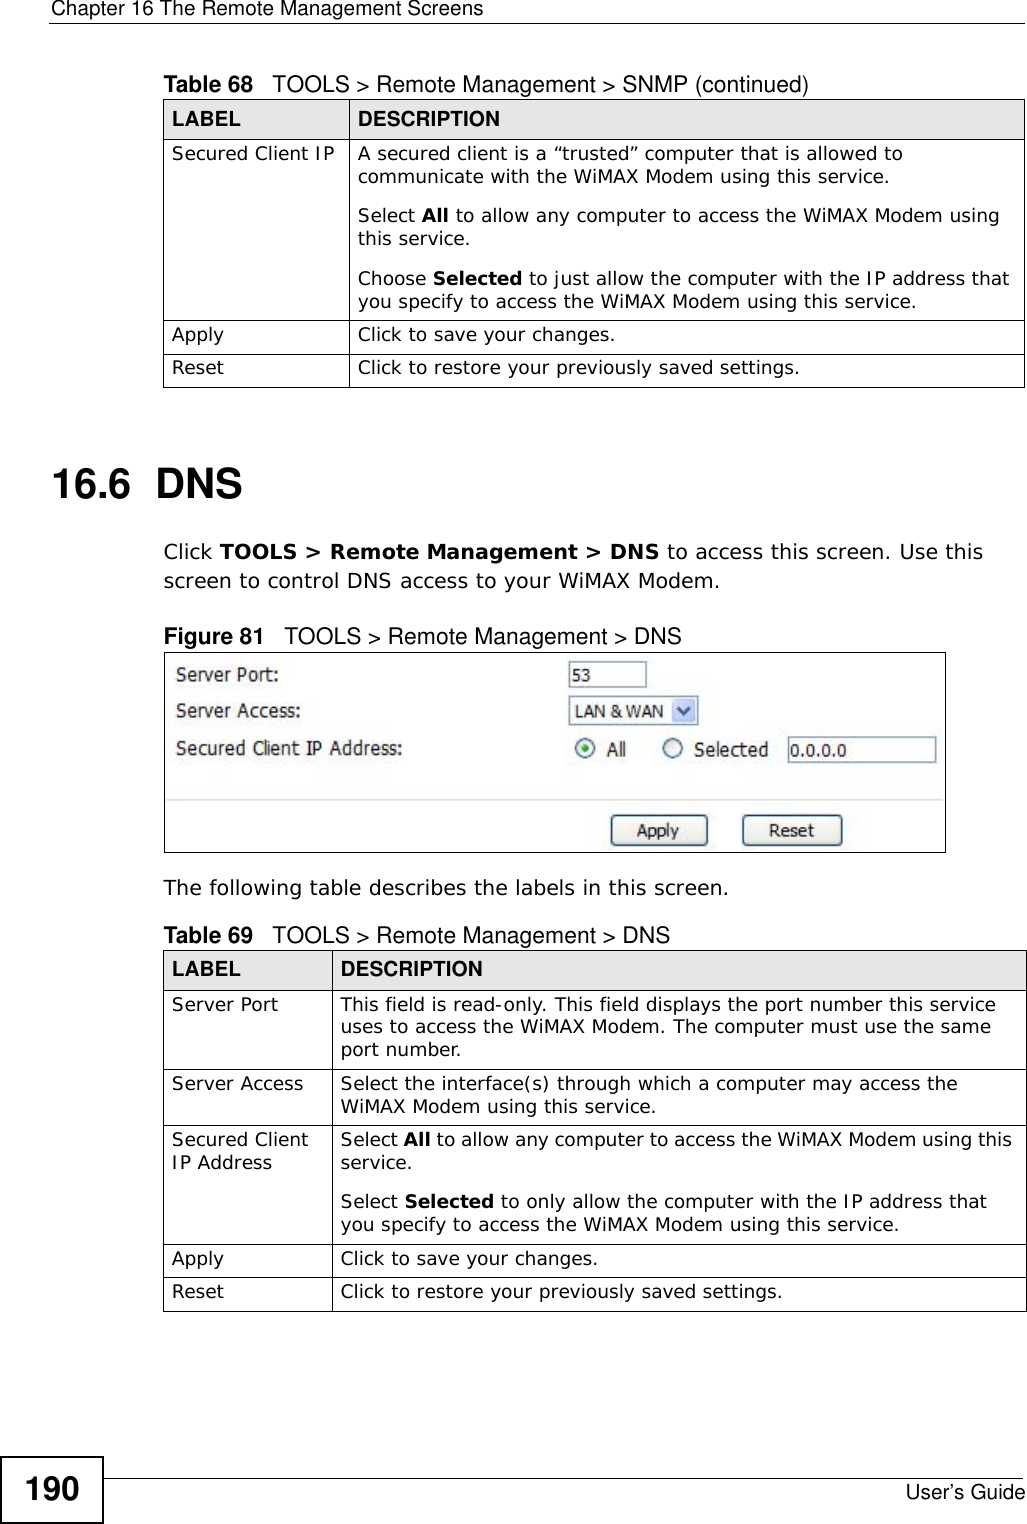 Chapter 16 The Remote Management ScreensUser’s Guide19016.6  DNSClick TOOLS &gt; Remote Management &gt; DNS to access this screen. Use this screen to control DNS access to your WiMAX Modem.Figure 81   TOOLS &gt; Remote Management &gt; DNSThe following table describes the labels in this screen.Secured Client IP A secured client is a “trusted” computer that is allowed to communicate with the WiMAX Modem using this service. Select All to allow any computer to access the WiMAX Modem using this service.Choose Selected to just allow the computer with the IP address that you specify to access the WiMAX Modem using this service.Apply Click to save your changes.Reset Click to restore your previously saved settings.Table 68   TOOLS &gt; Remote Management &gt; SNMP (continued)LABEL DESCRIPTIONTable 69   TOOLS &gt; Remote Management &gt; DNSLABEL DESCRIPTIONServer Port This field is read-only. This field displays the port number this service uses to access the WiMAX Modem. The computer must use the same port number.Server Access Select the interface(s) through which a computer may access the WiMAX Modem using this service.Secured Client IP Address Select All to allow any computer to access the WiMAX Modem using this service.Select Selected to only allow the computer with the IP address that you specify to access the WiMAX Modem using this service.Apply Click to save your changes.Reset Click to restore your previously saved settings.